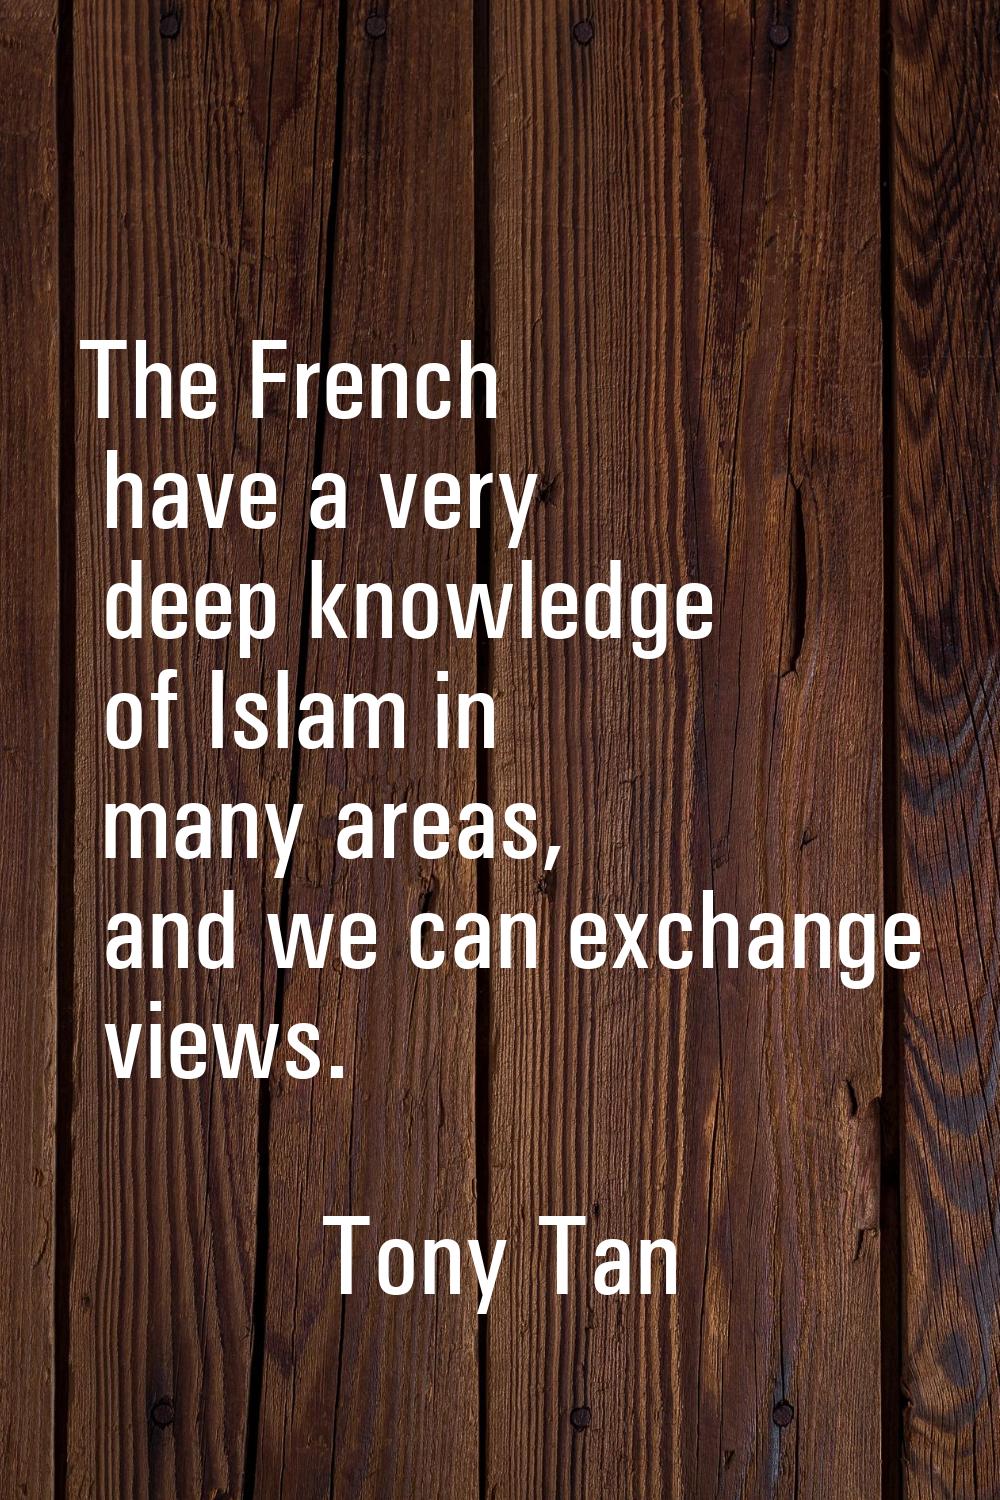 The French have a very deep knowledge of Islam in many areas, and we can exchange views.